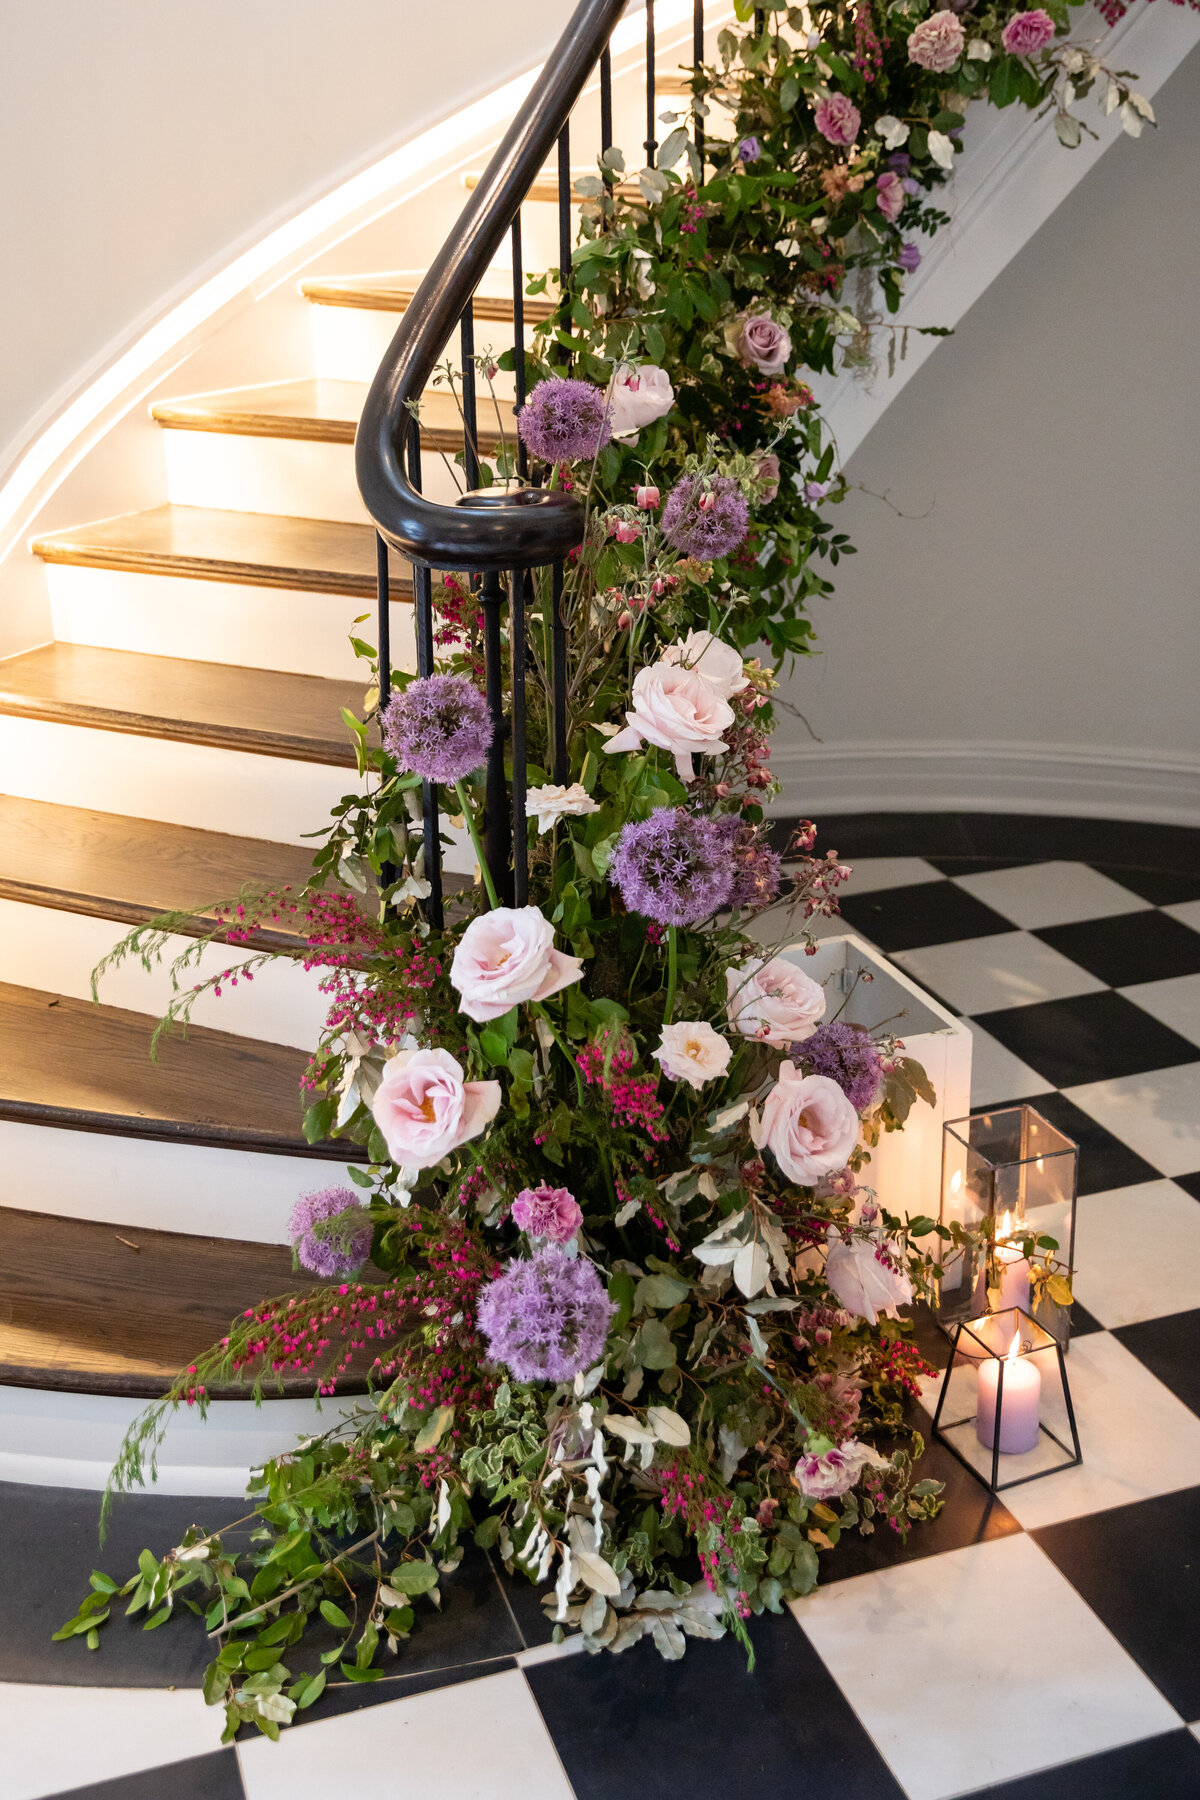 Lush floral installation growing up the staircase with natural greenery, purple globe allium, blush garden roses, and pastel wildflowers. Bridgerton inspired engagement party at a private home in Nashville, TN.